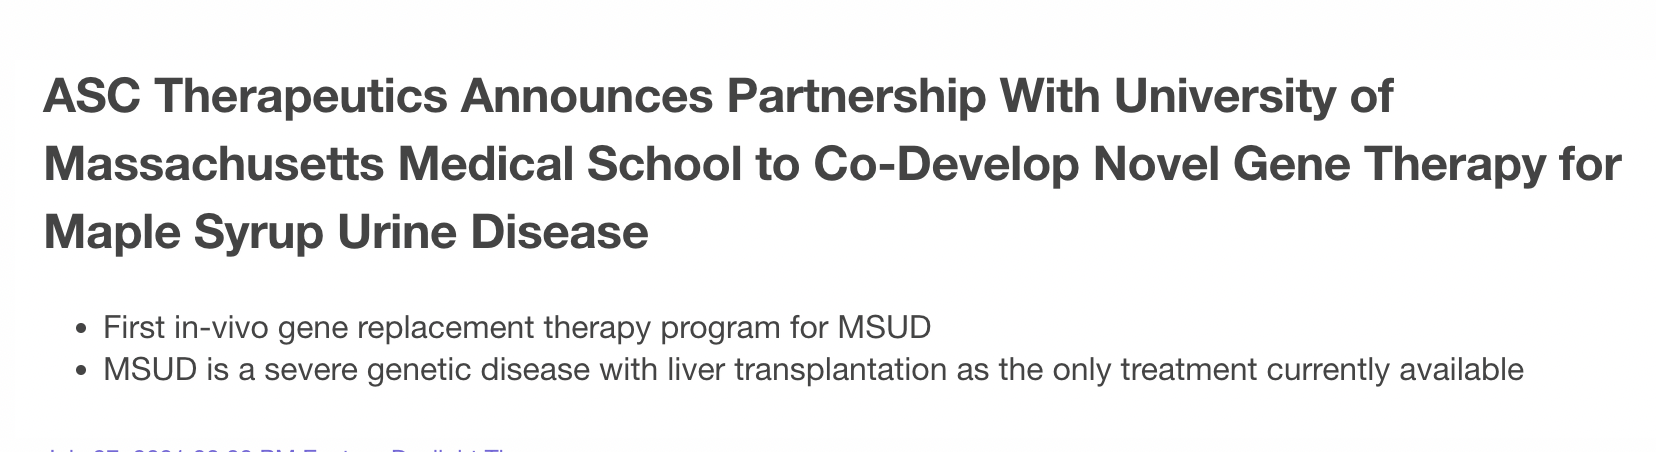 ASC Therapeutics Announces Partnership With UMass Chan Medical School to Co-Develop Novel Gene Therapy for Maple Syrup Urine Disease